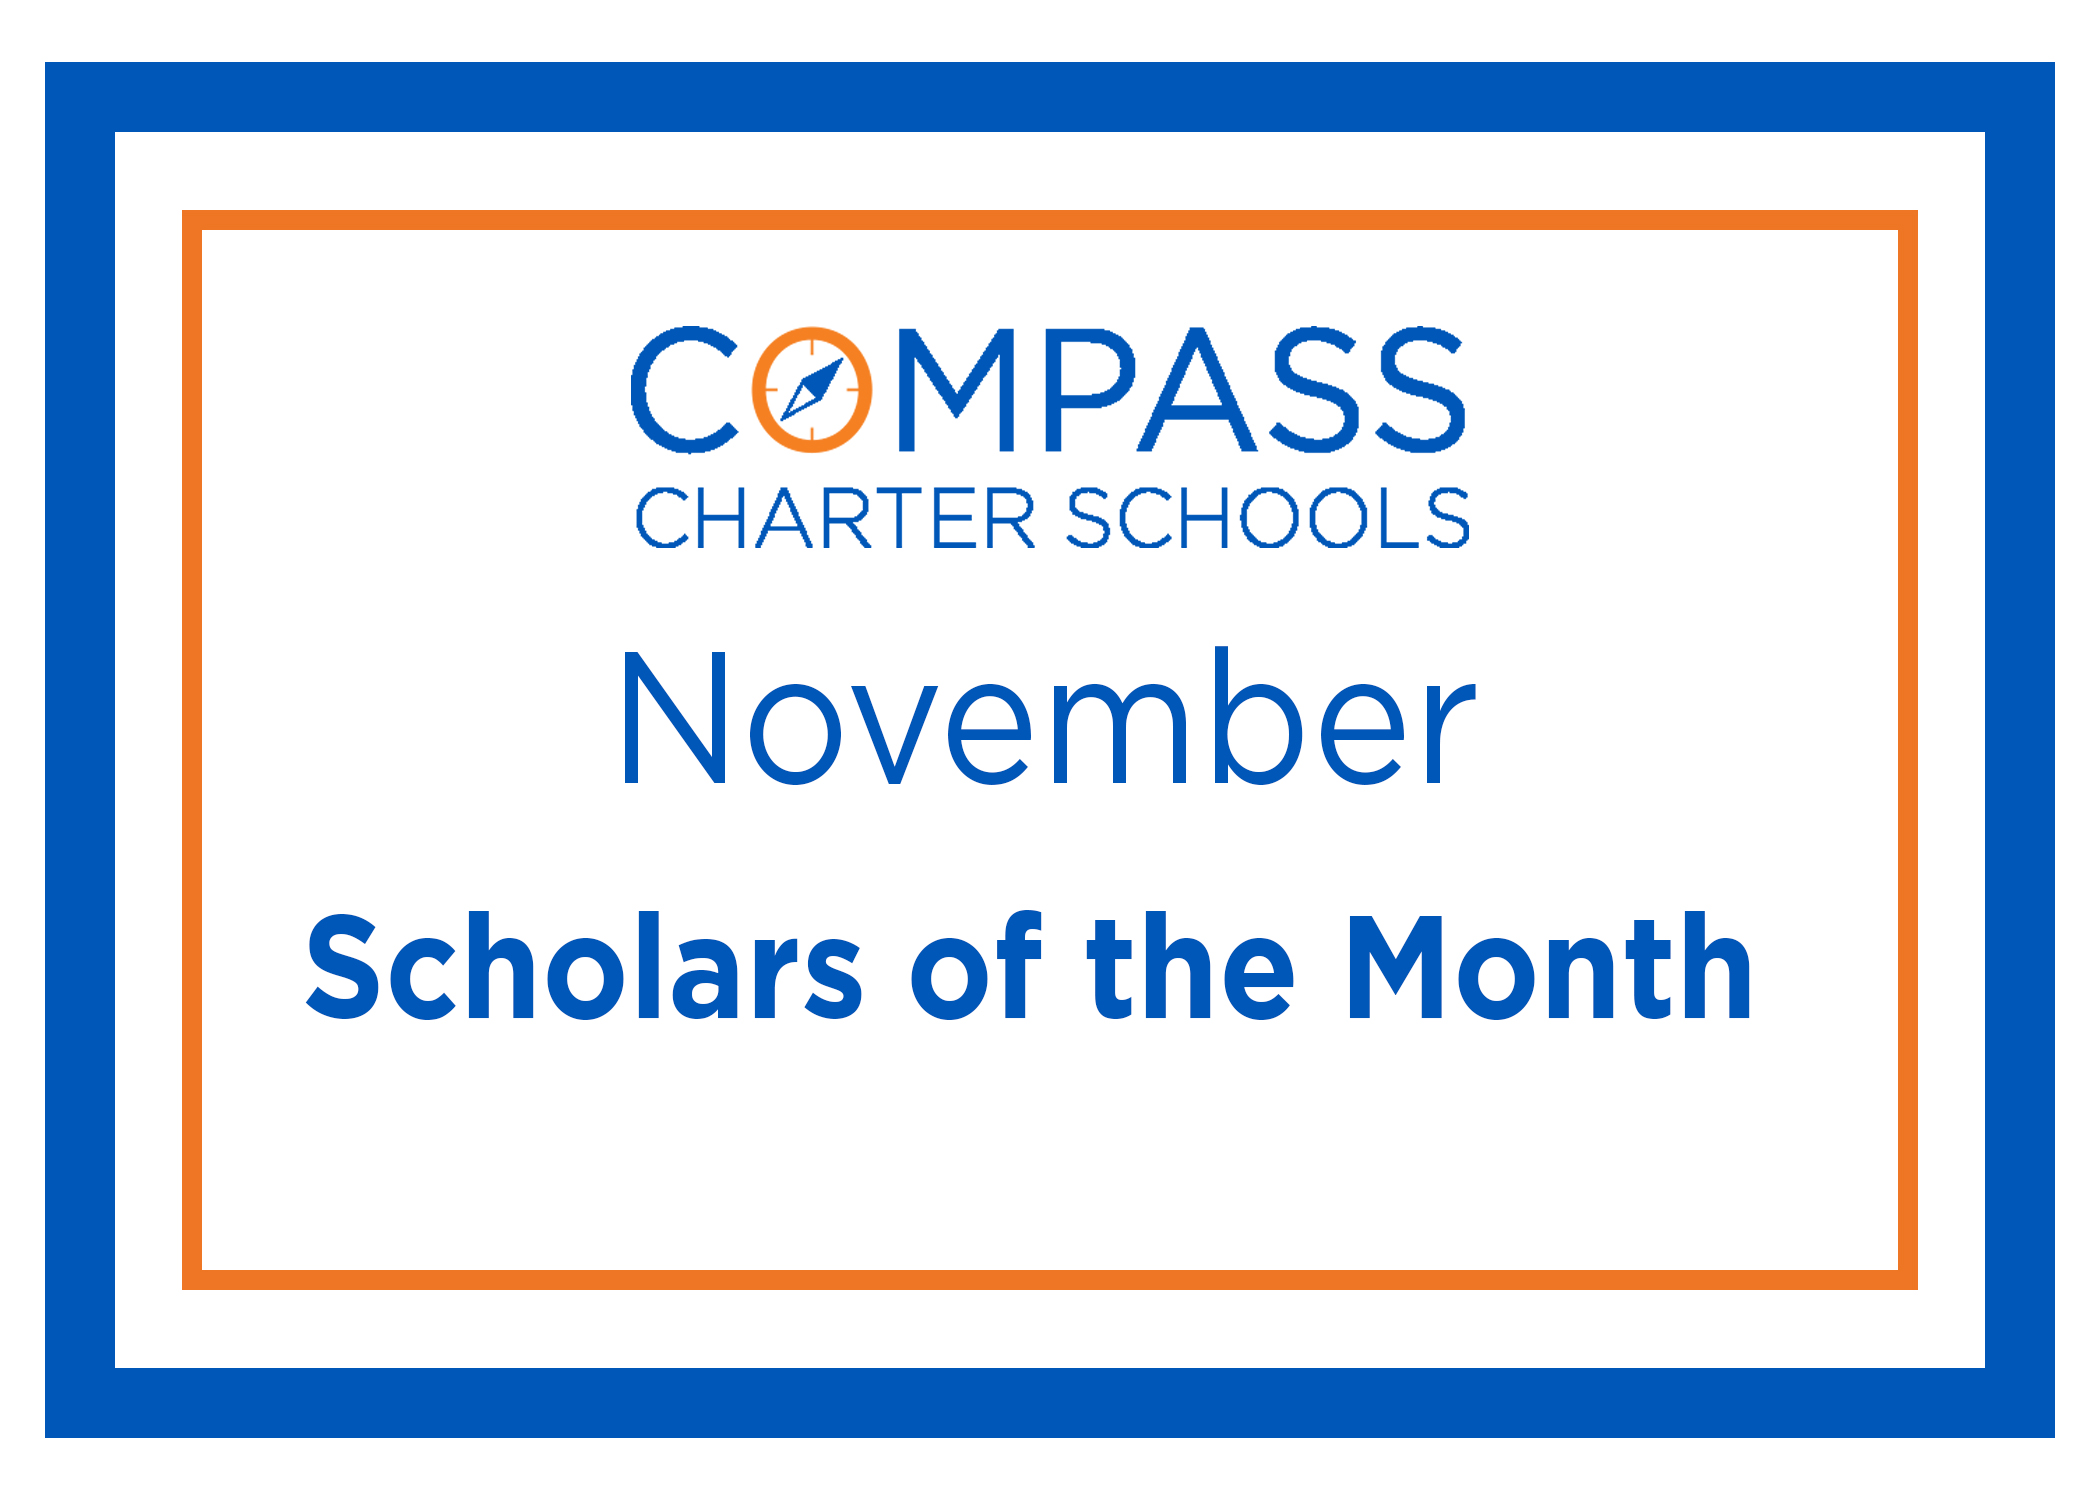 Compass Charter Schools (CCS) Names their November Scholars of the